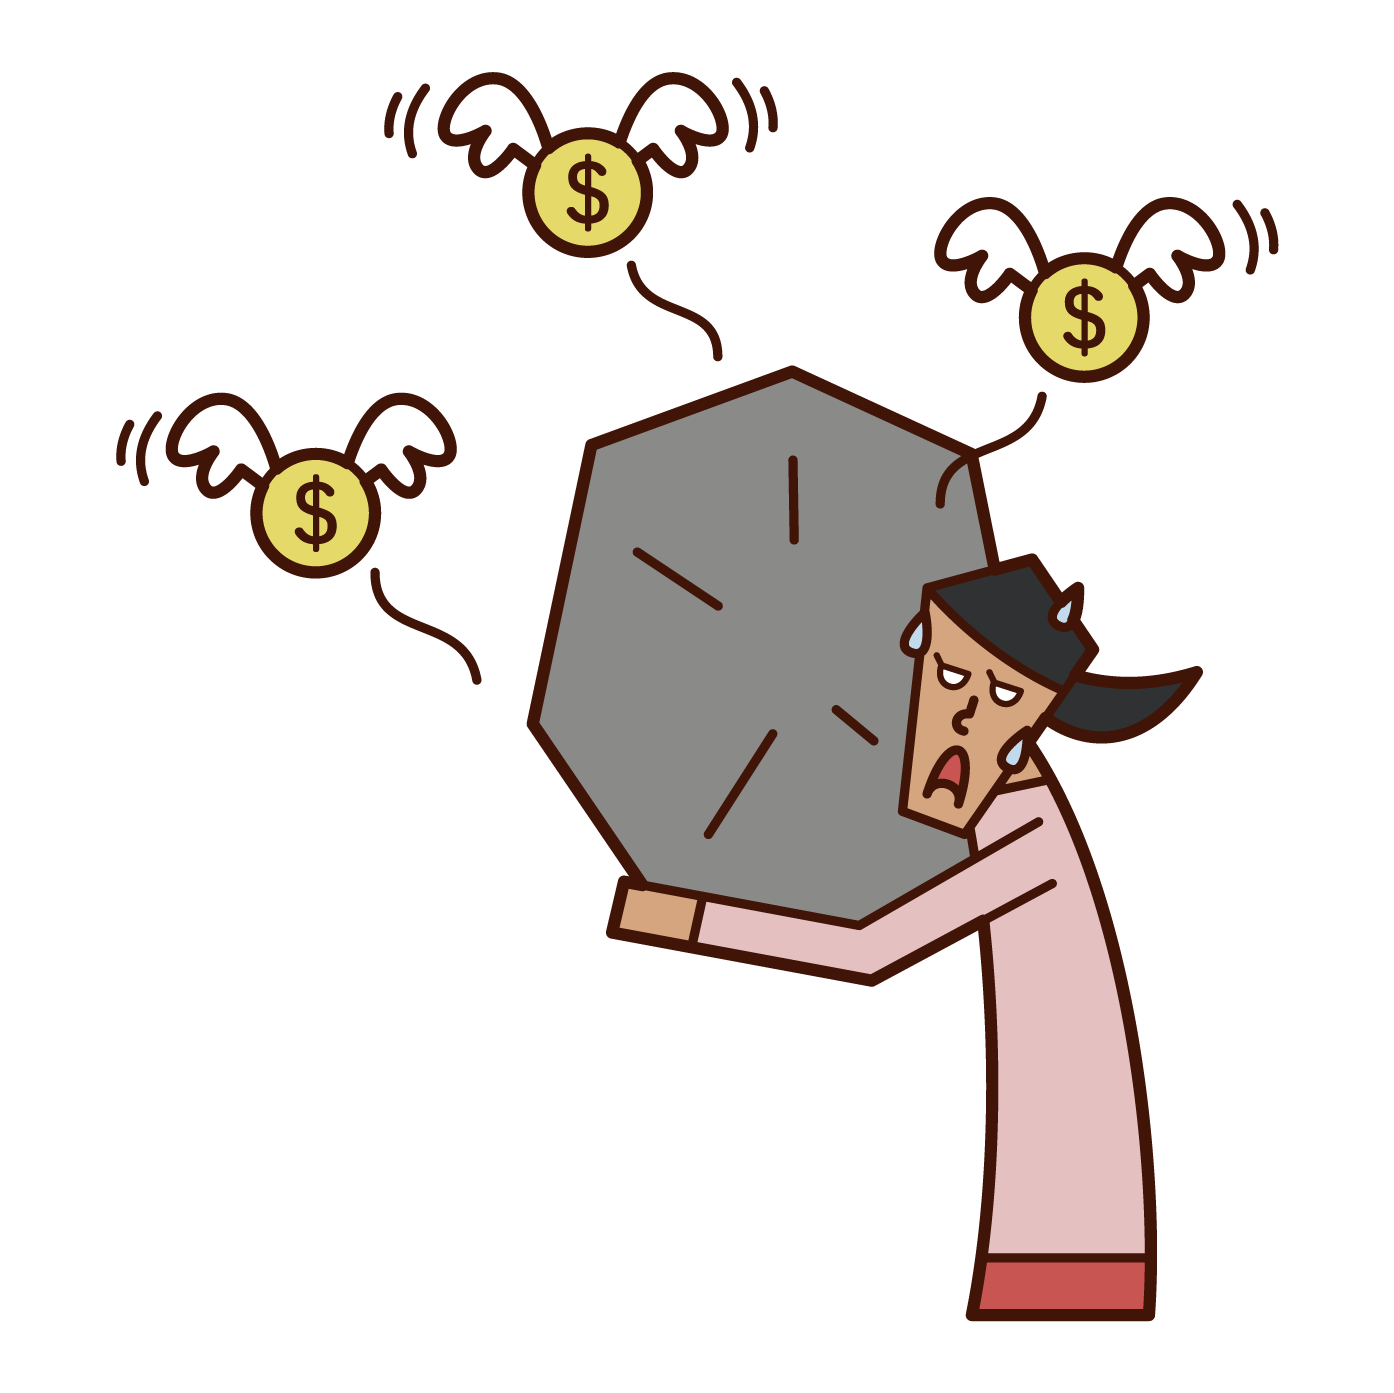 Illustration of a woman in debt